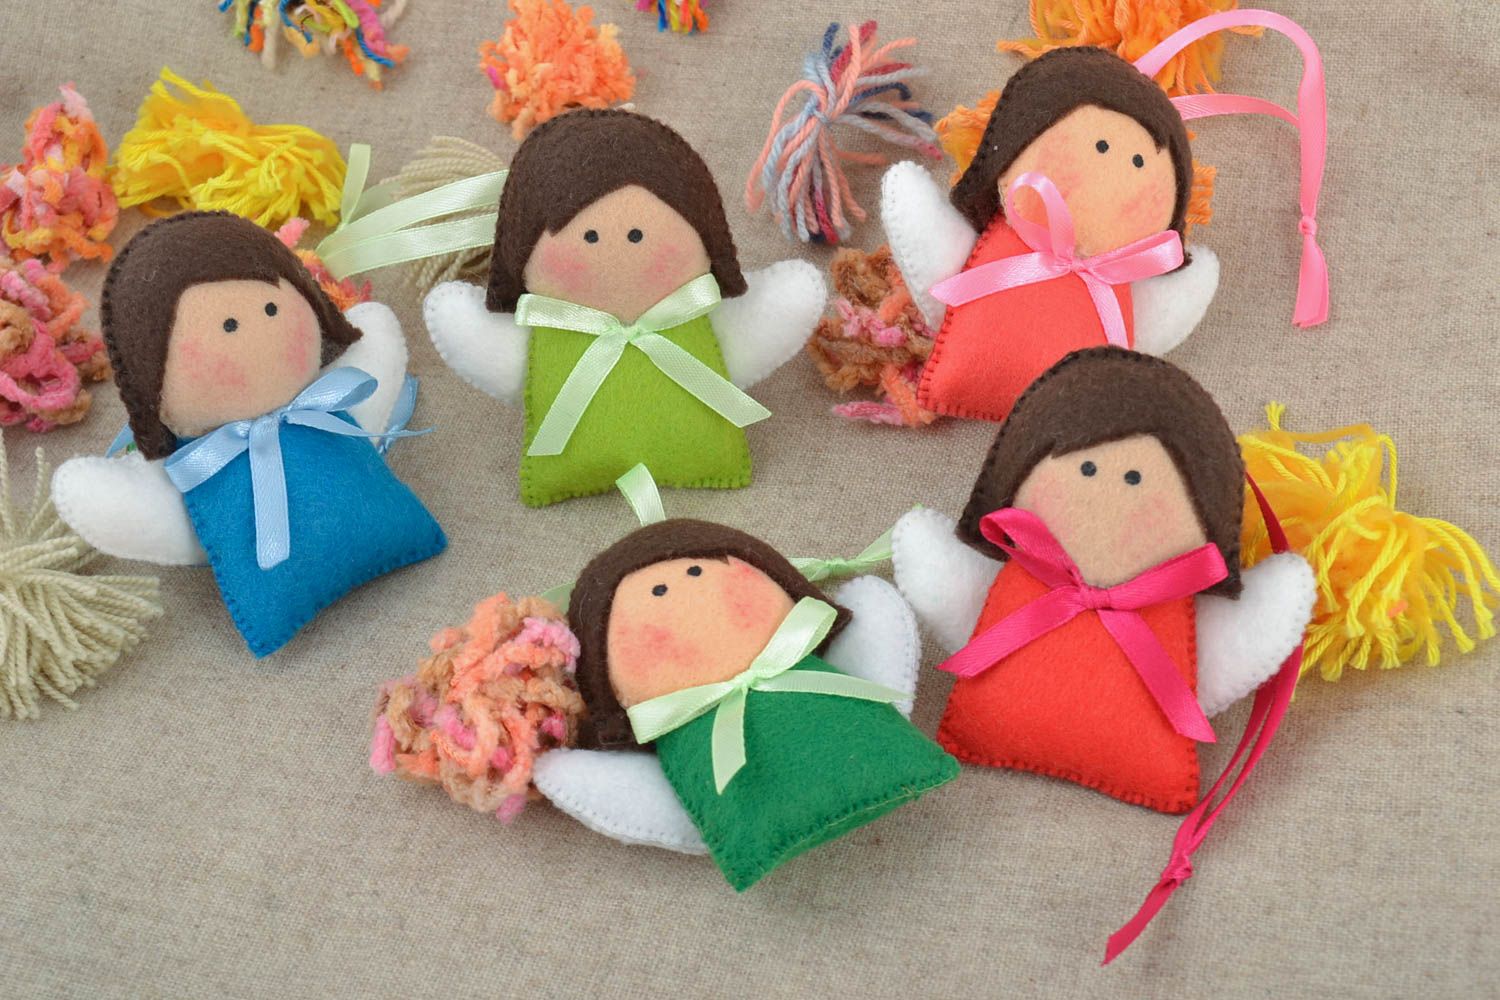 Handmade soft toys angels set of 5 different colored pieces made of felt photo 1